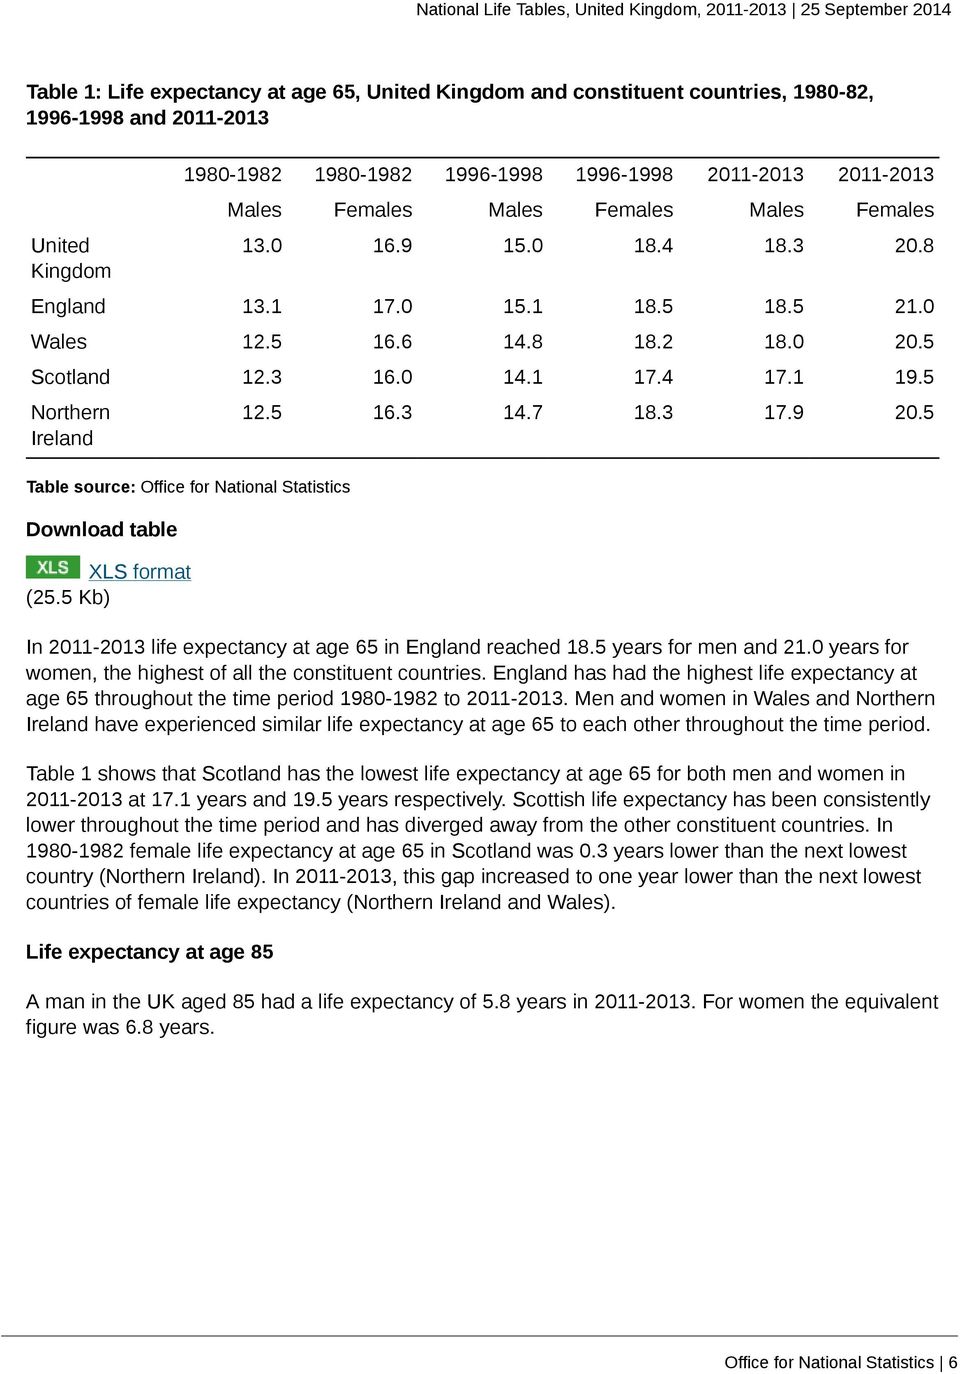 5 Northern Ireland Table source: Office for National Statistics Download table (25.5 Kb) 12.5 16.3 14.7 18.3 17.9 20.5 In 2011-2013 life expectancy at age 65 in England reached 18.